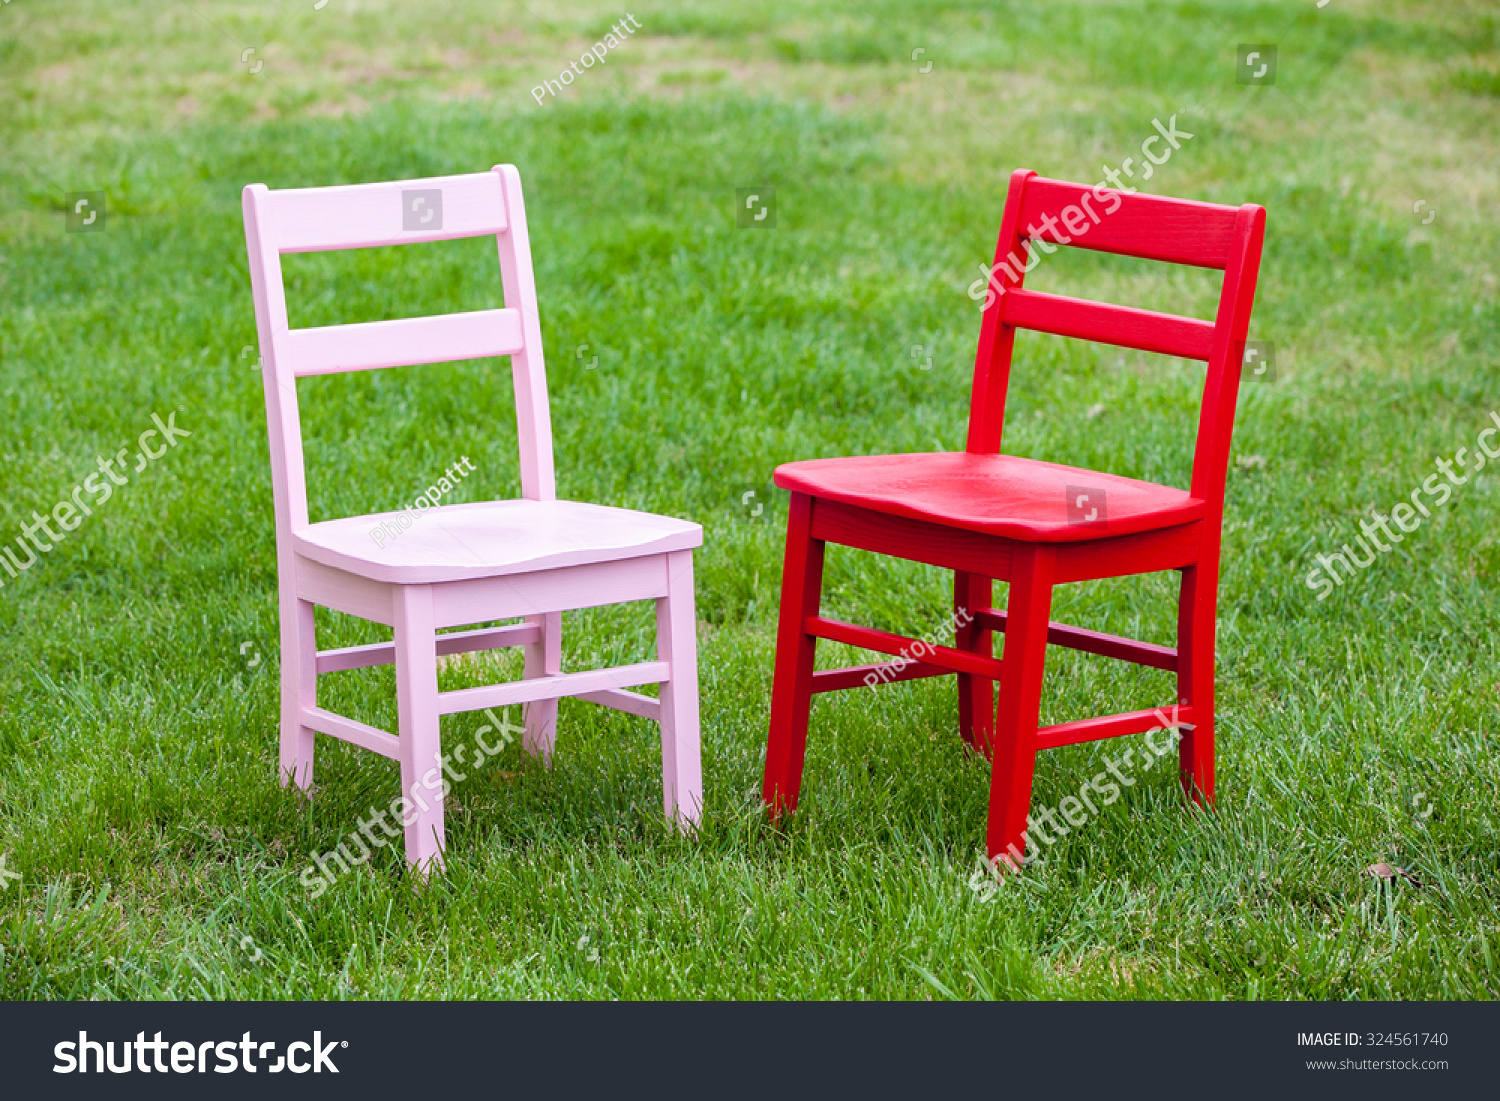 Old School Chairs Royalty Free Stock Image